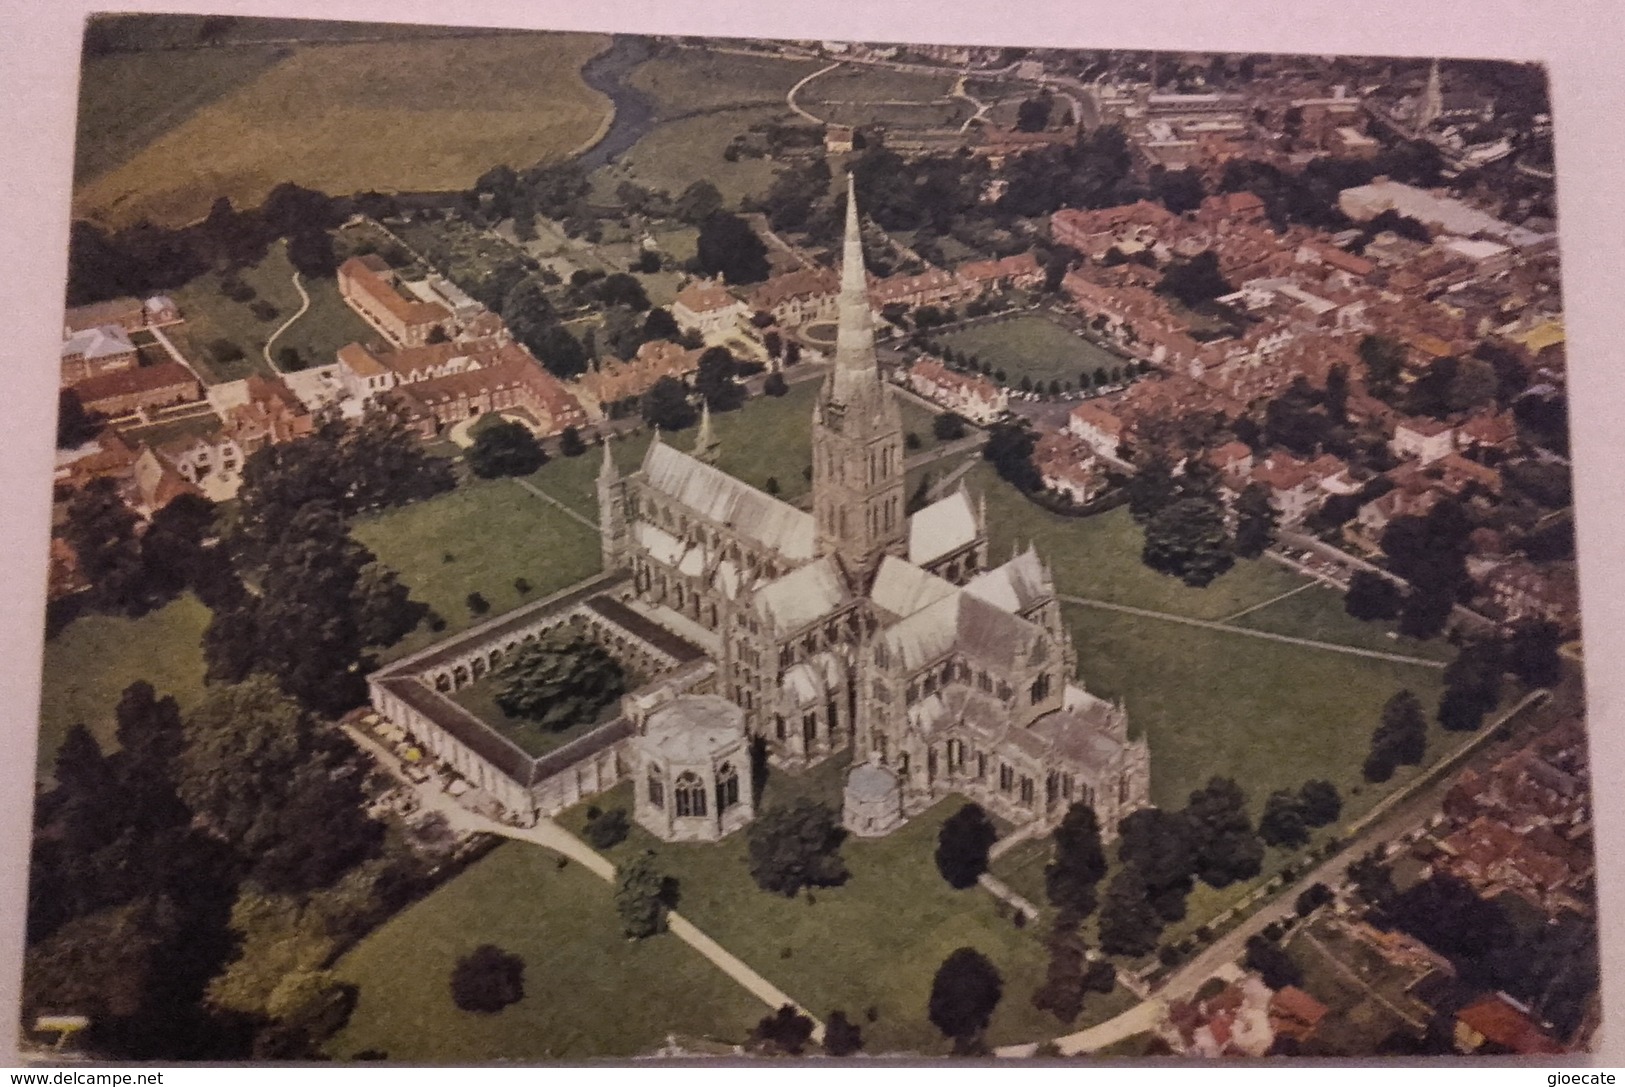 SALISBURY CATHEDRAL FROM THE AIR – WILTS. 6065 – VIAGG. 1966 – (2097) - Salisbury